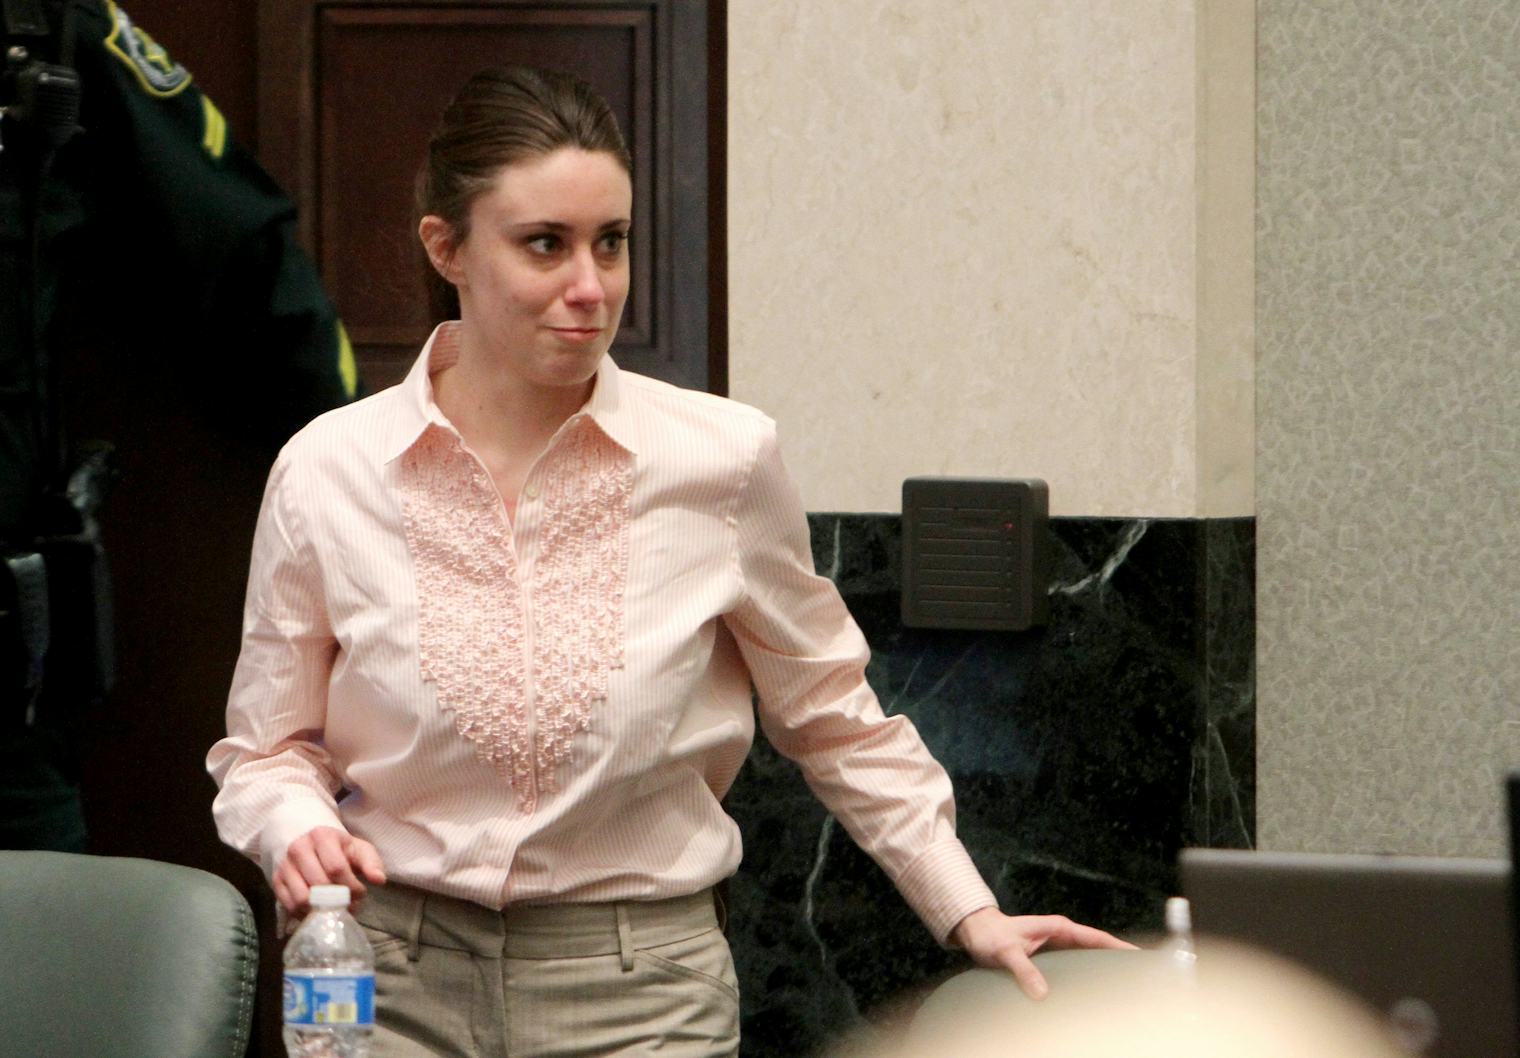 Where Is Casey Anthony Now? She Has Kept A Low Profile For Years After